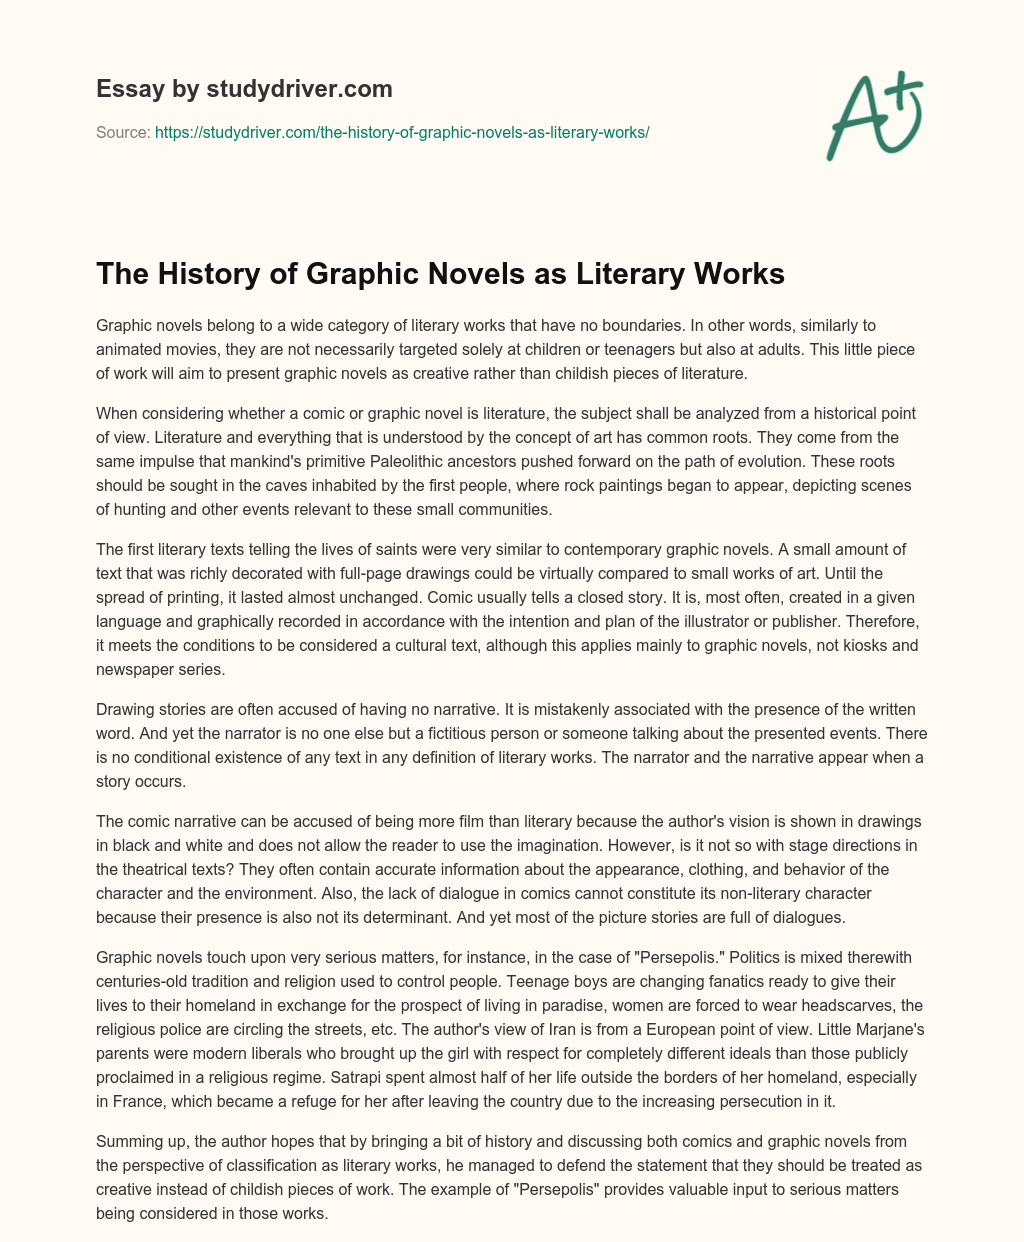 The History of Graphic Novels as Literary Works essay